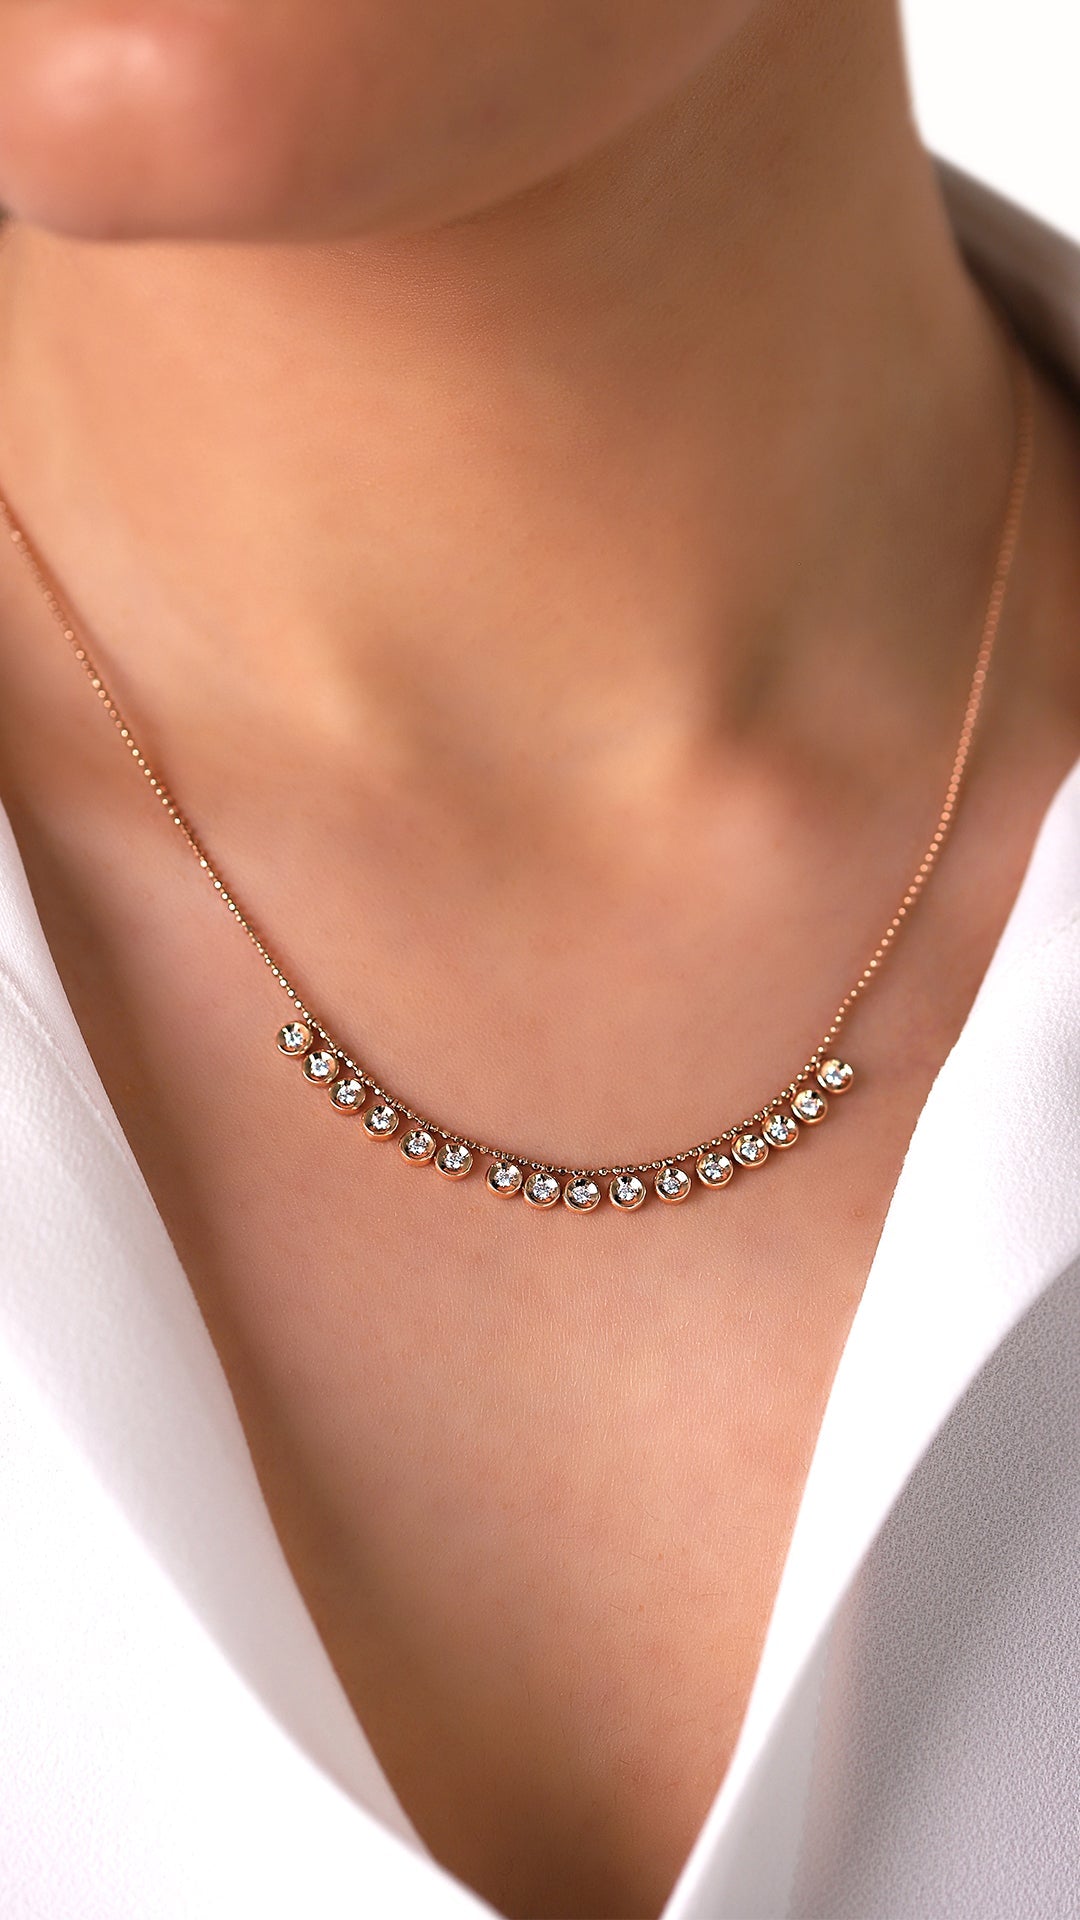 Jewelry Serenity | Diamond Necklace | 0.41 Cts. | 14K Gold - necklace Zengoda Shop online from Artisan Brands